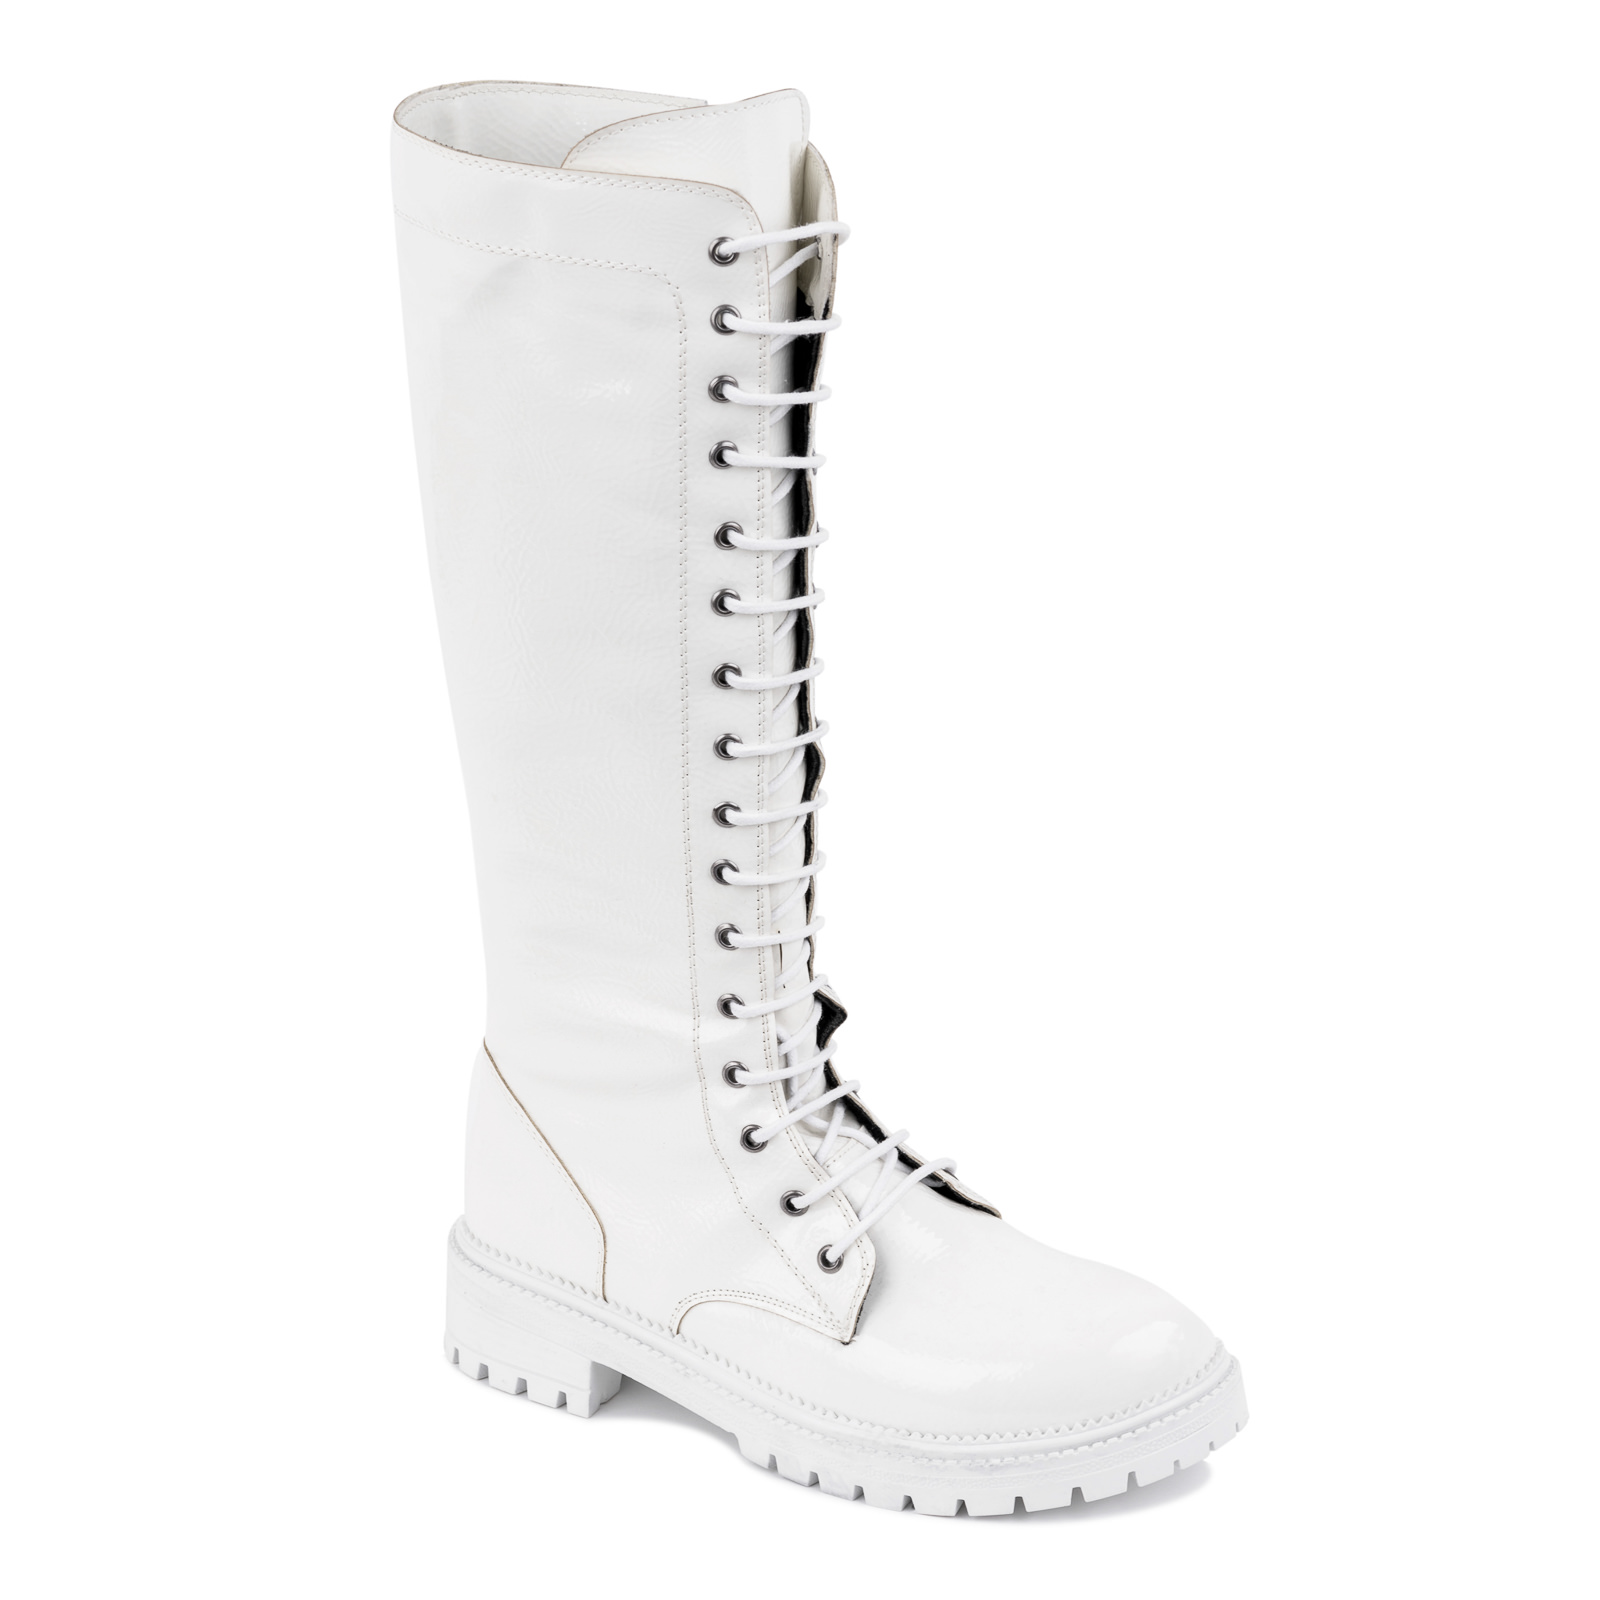 PATENT HIGH CANADIAN BOOTS - WHITE